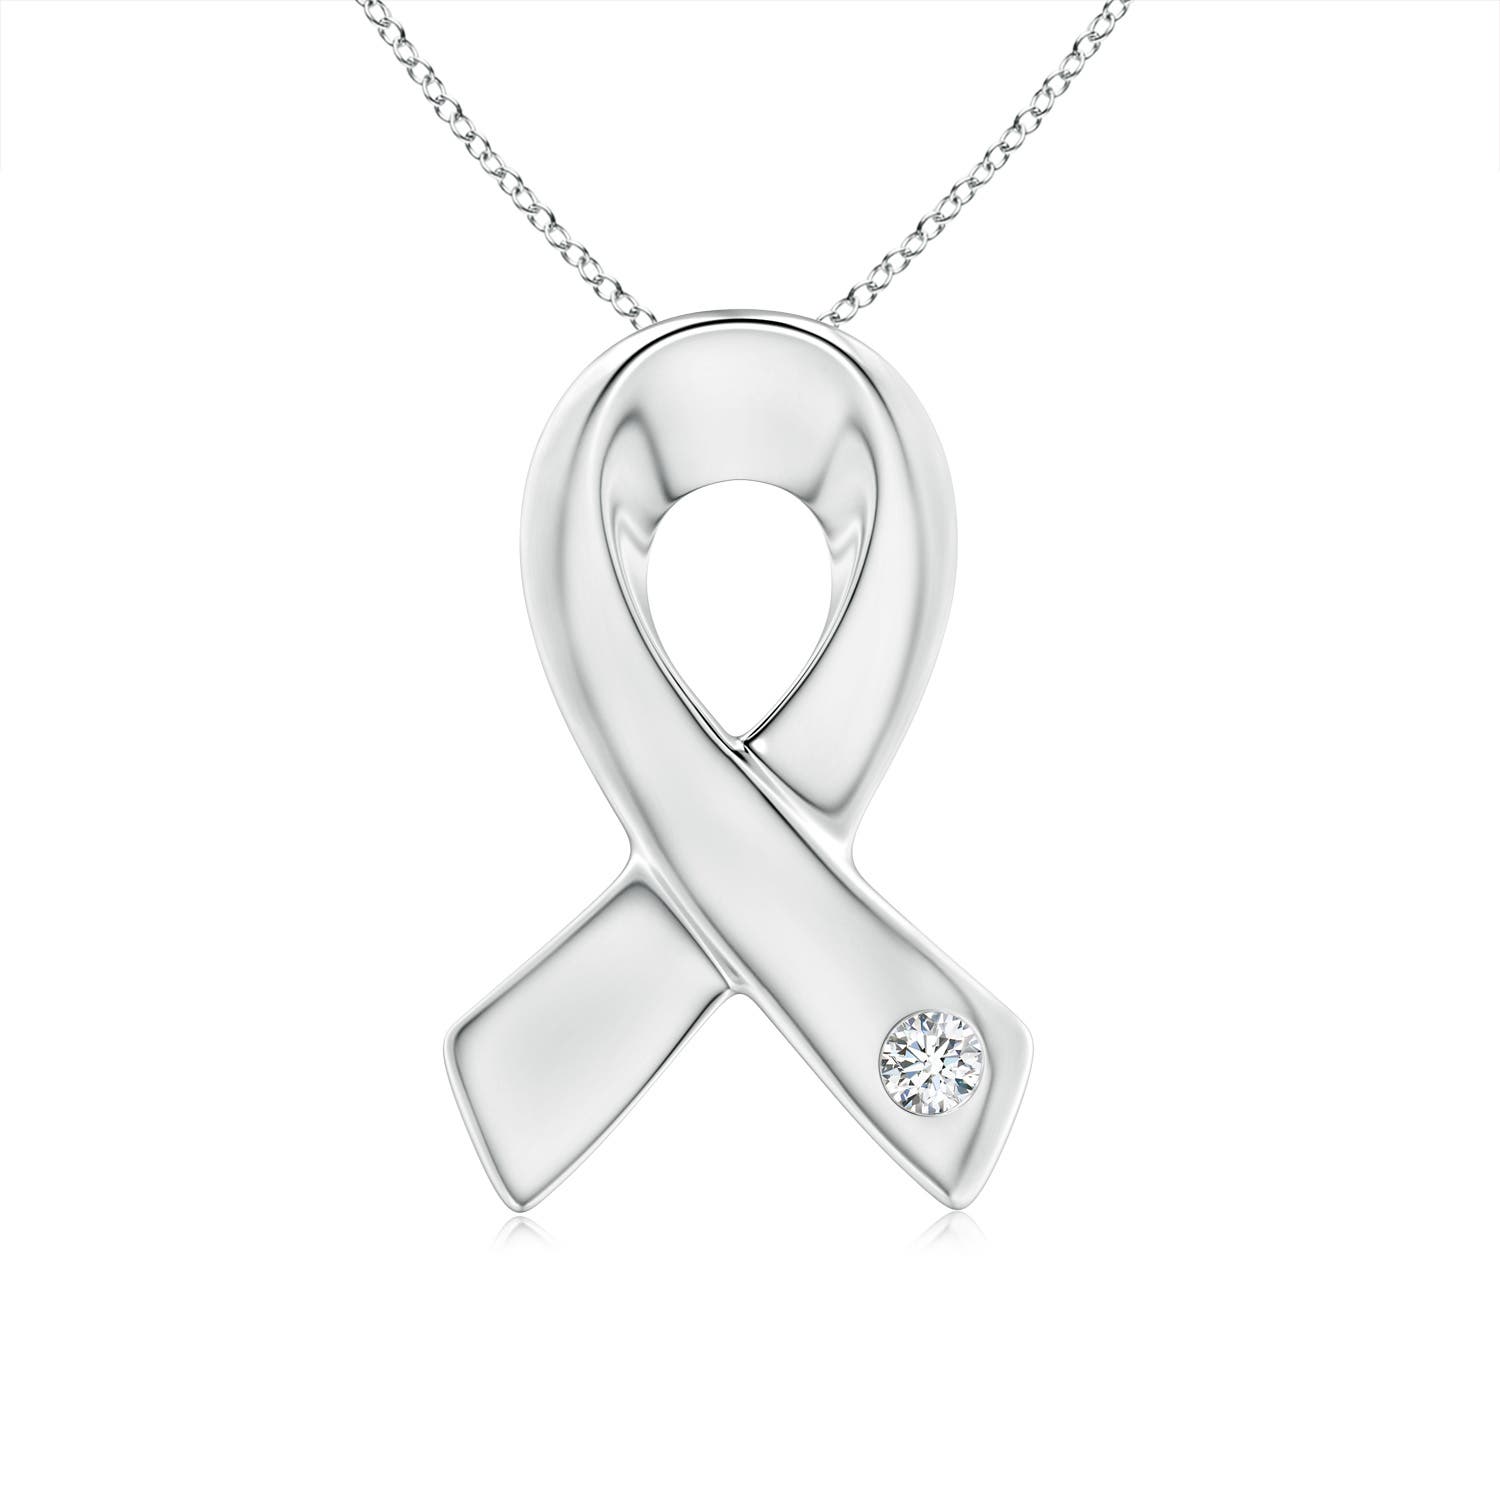 Sterling Silver Polished Cancer Awareness Ribbon Necklace - 20 Inch 